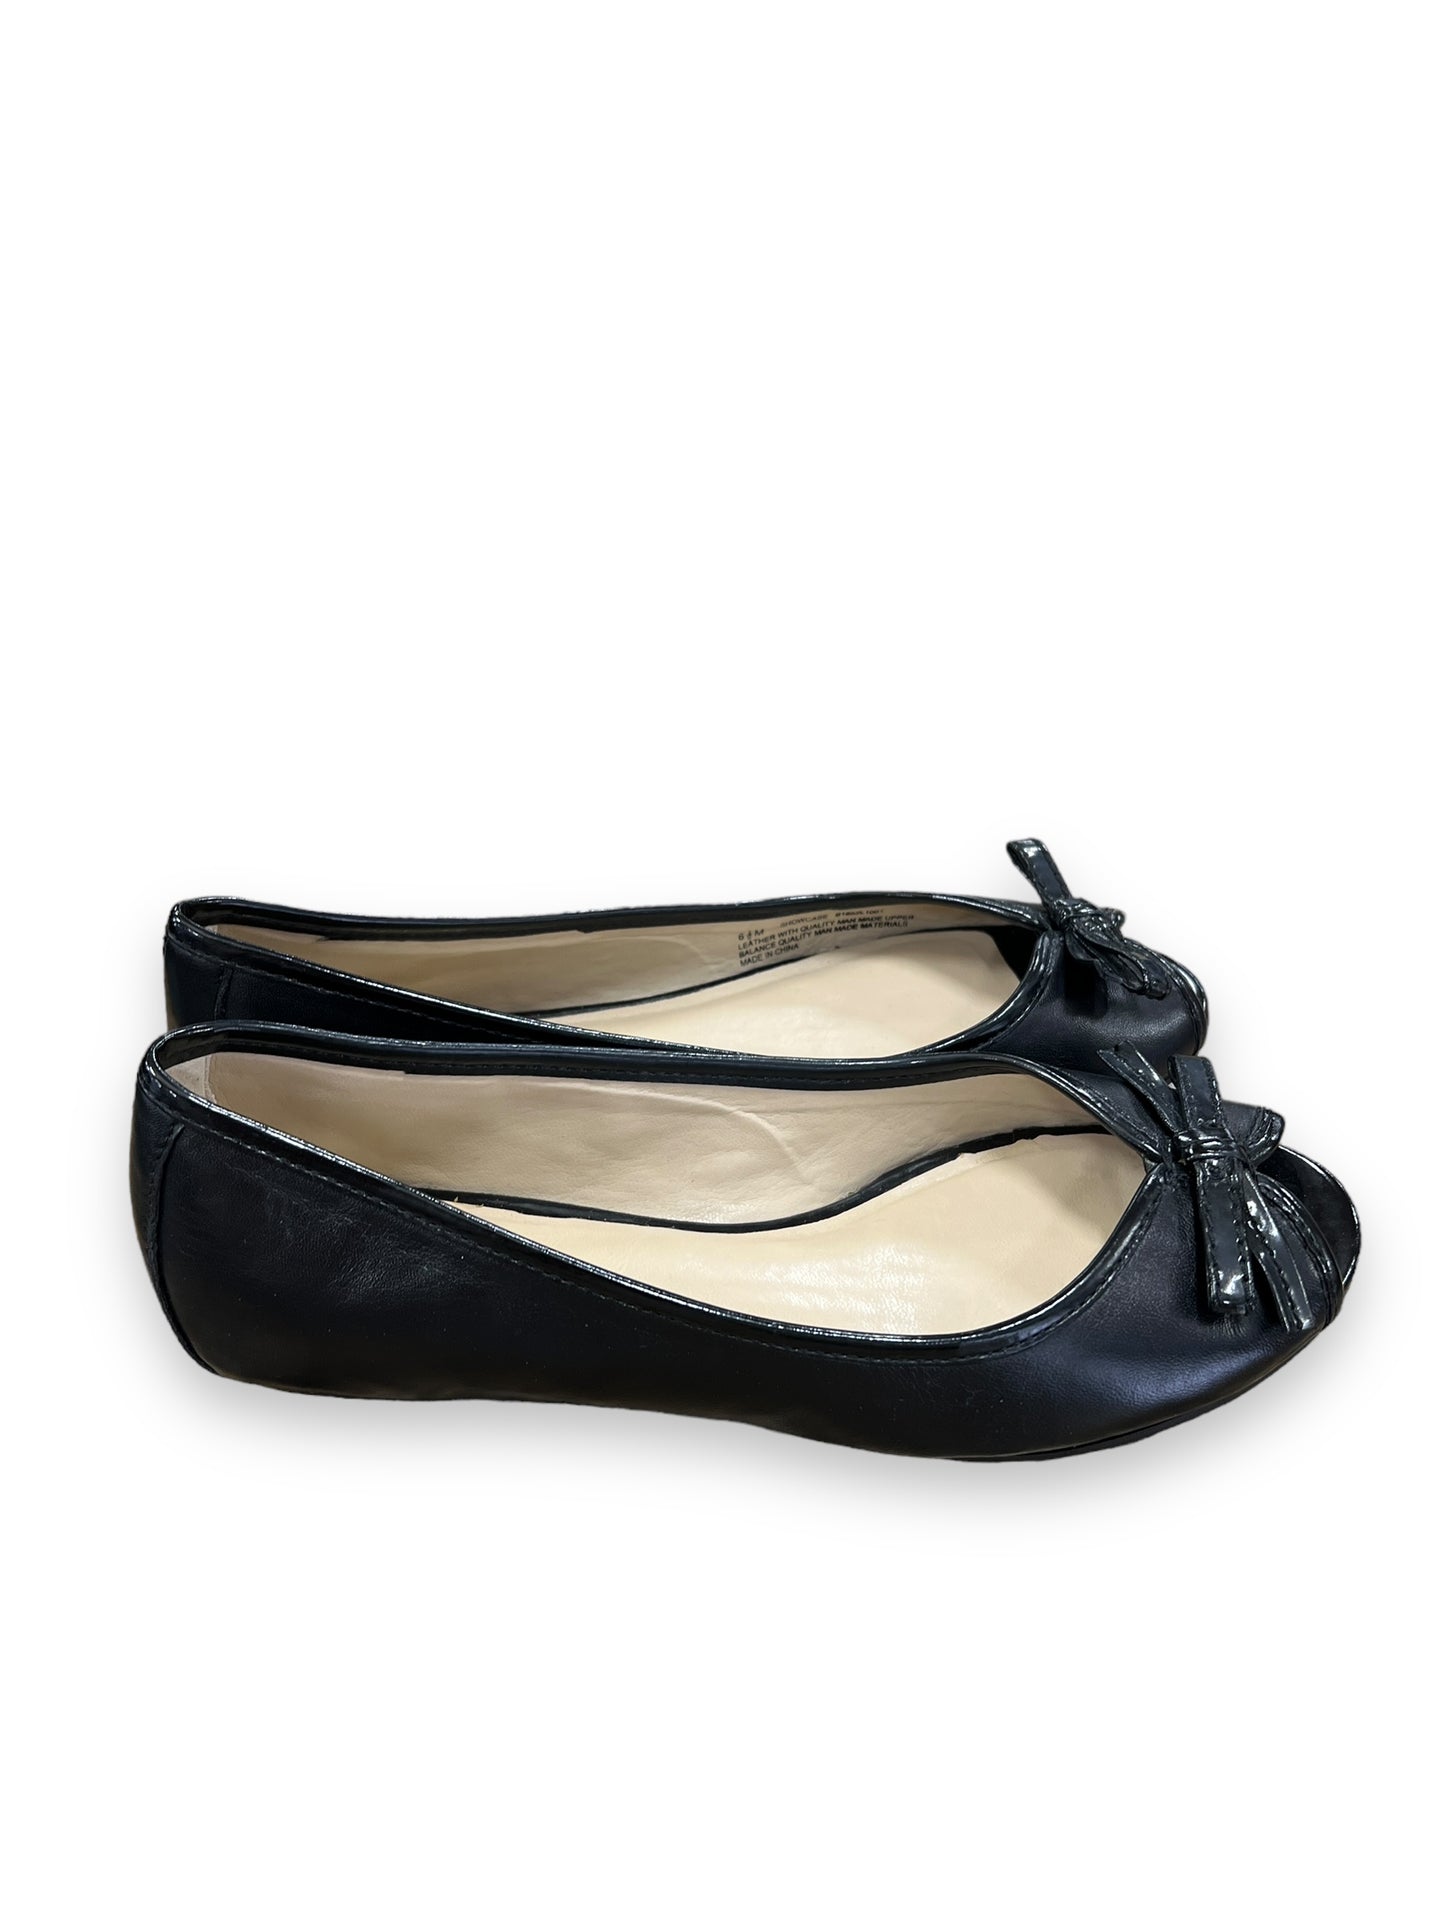 Shoes Flats By Naturalizer  Size: 6.5